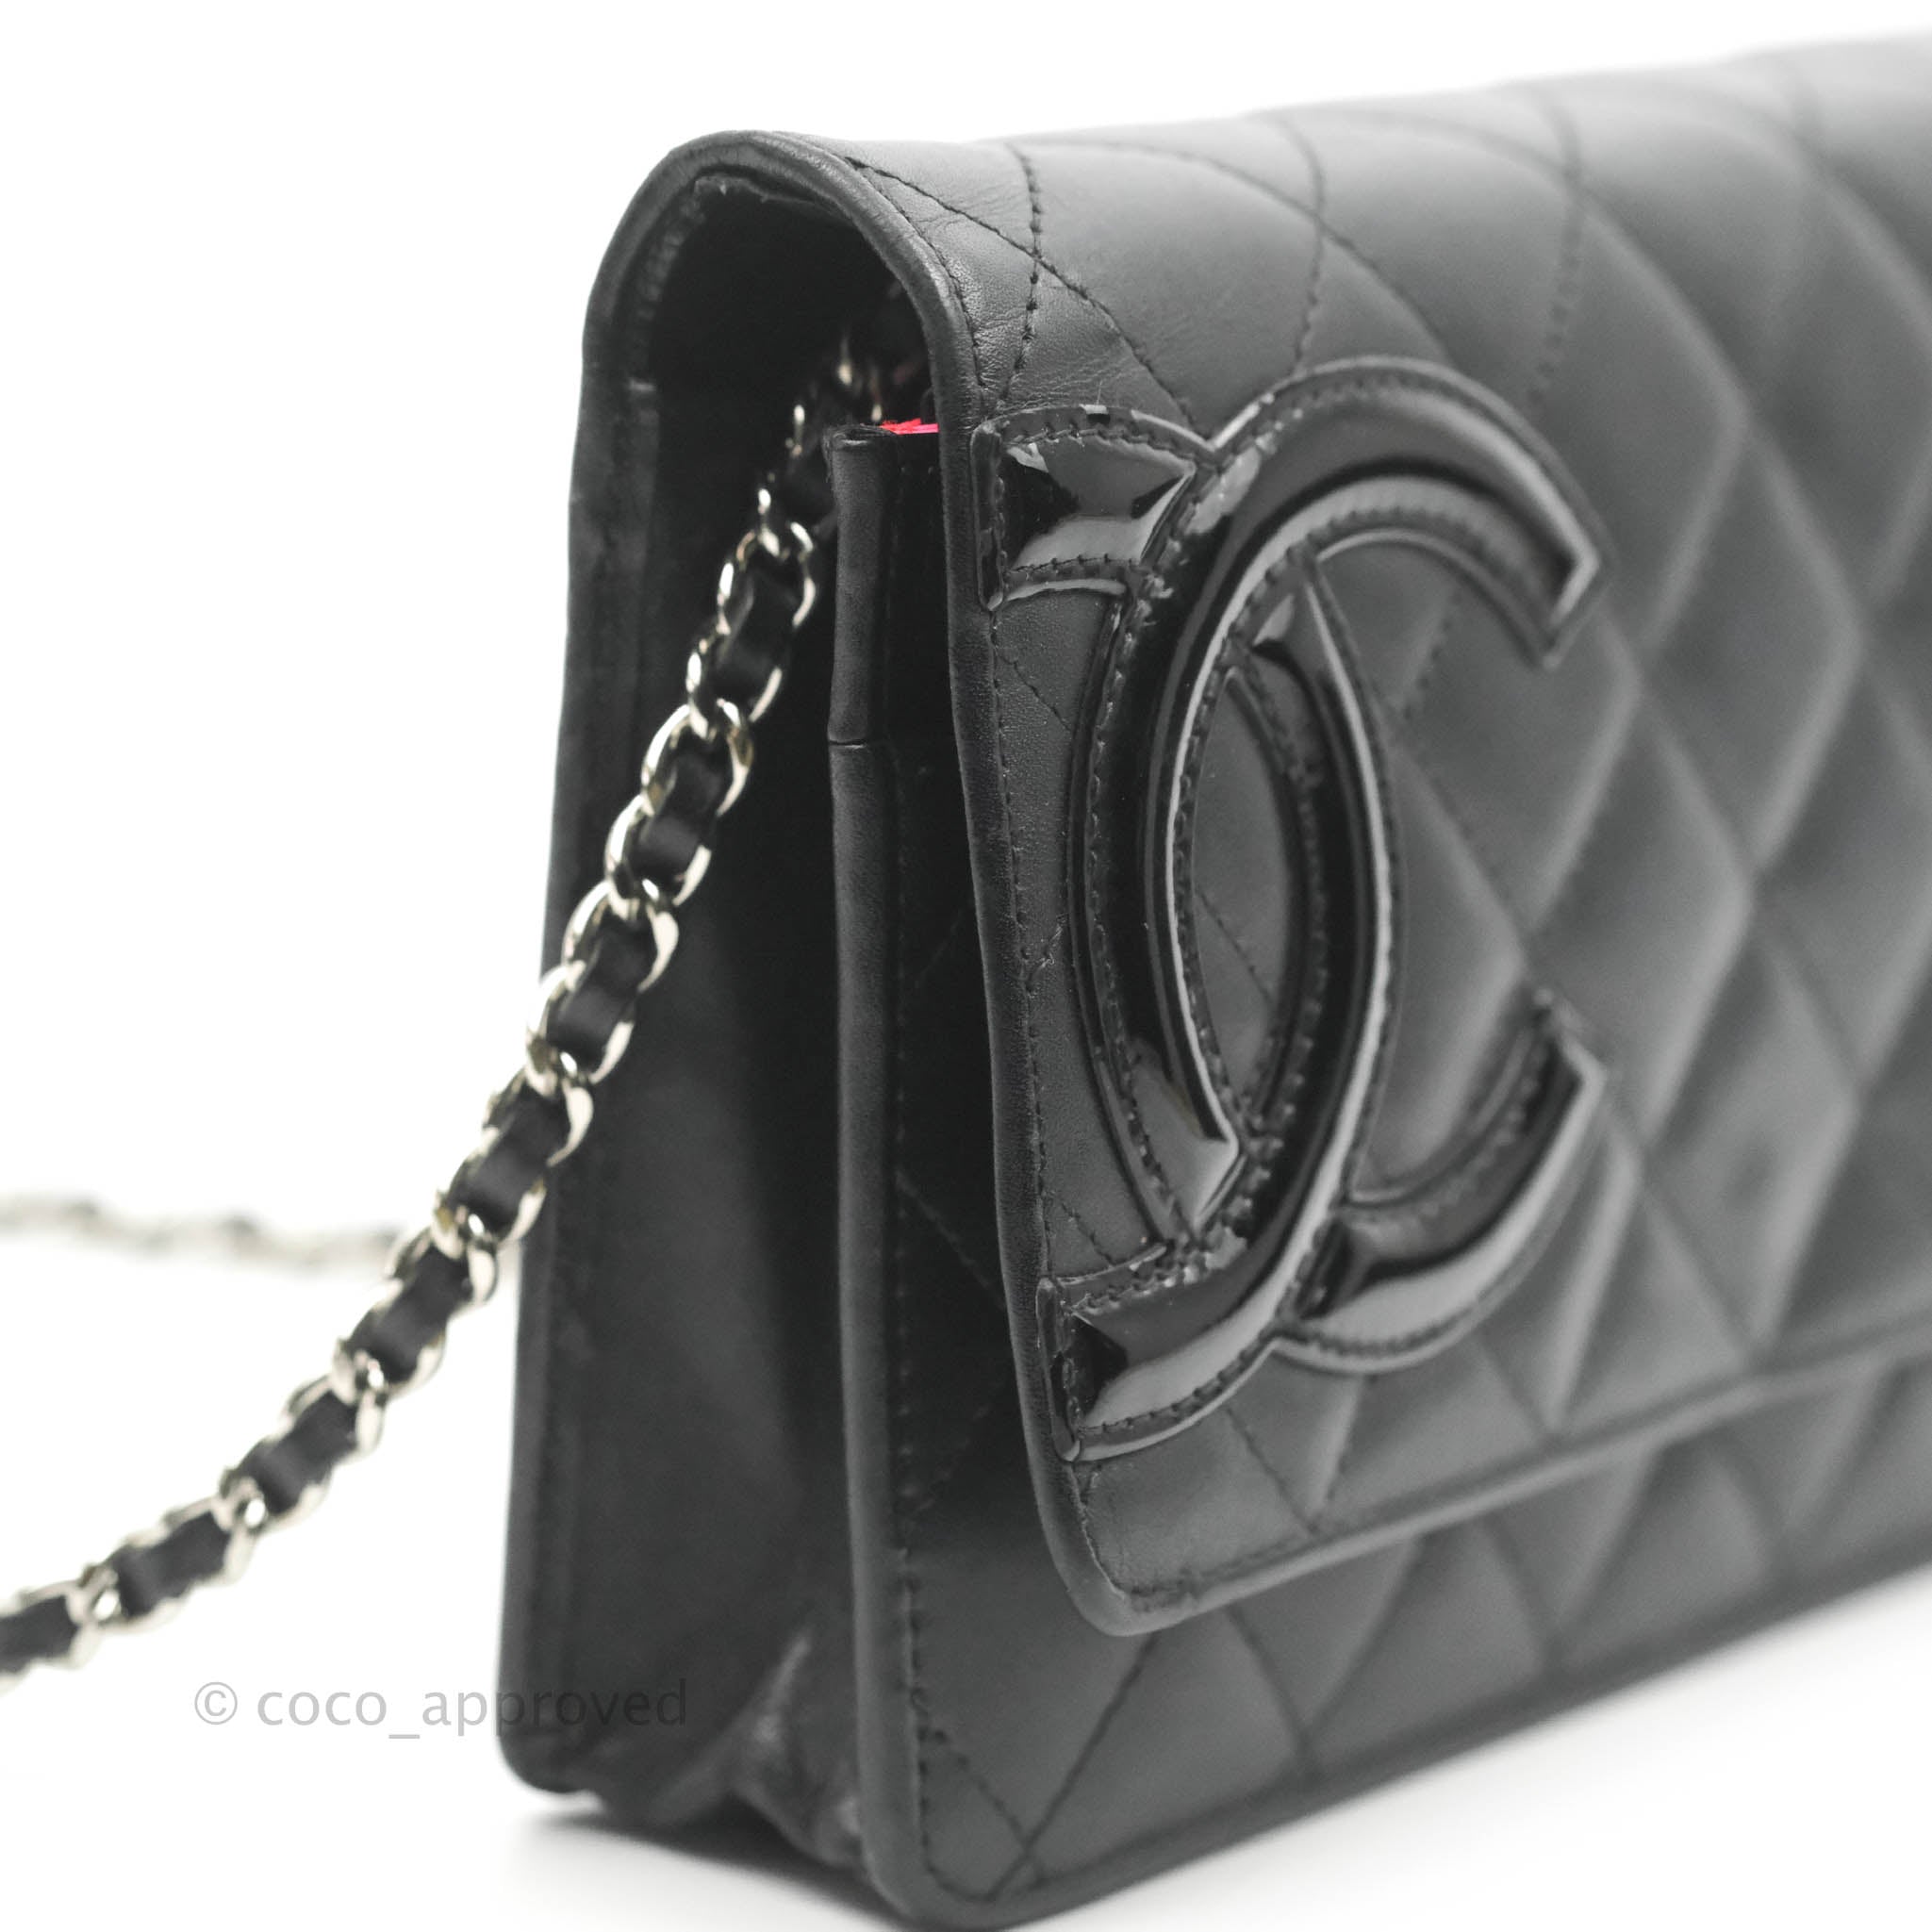 Chanel Wallet On Chain  Madison Avenue Couture